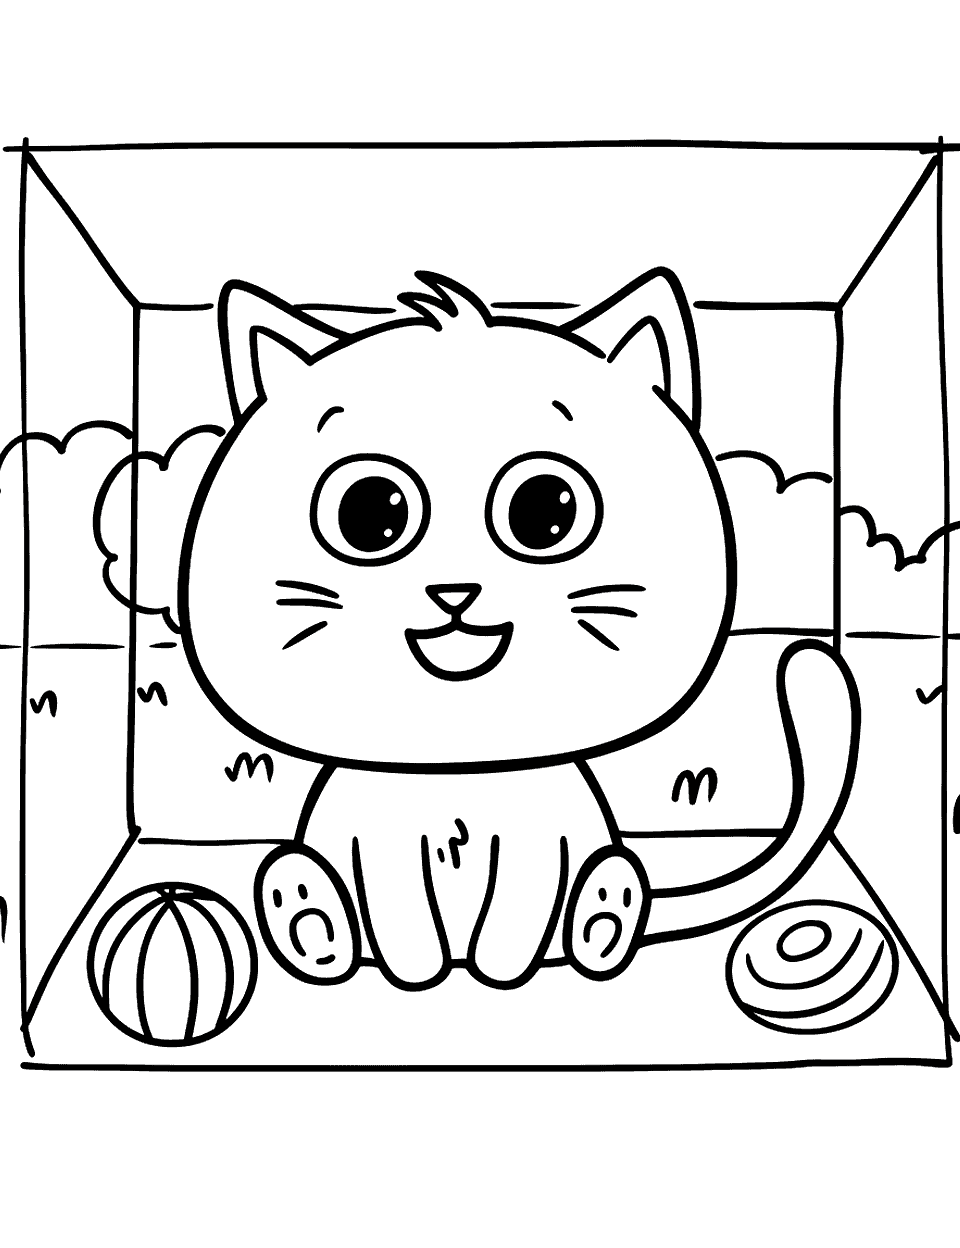 Cute Cat in a Square Shapes Coloring Page - A playful cat sitting inside a large square, with a few toys around.